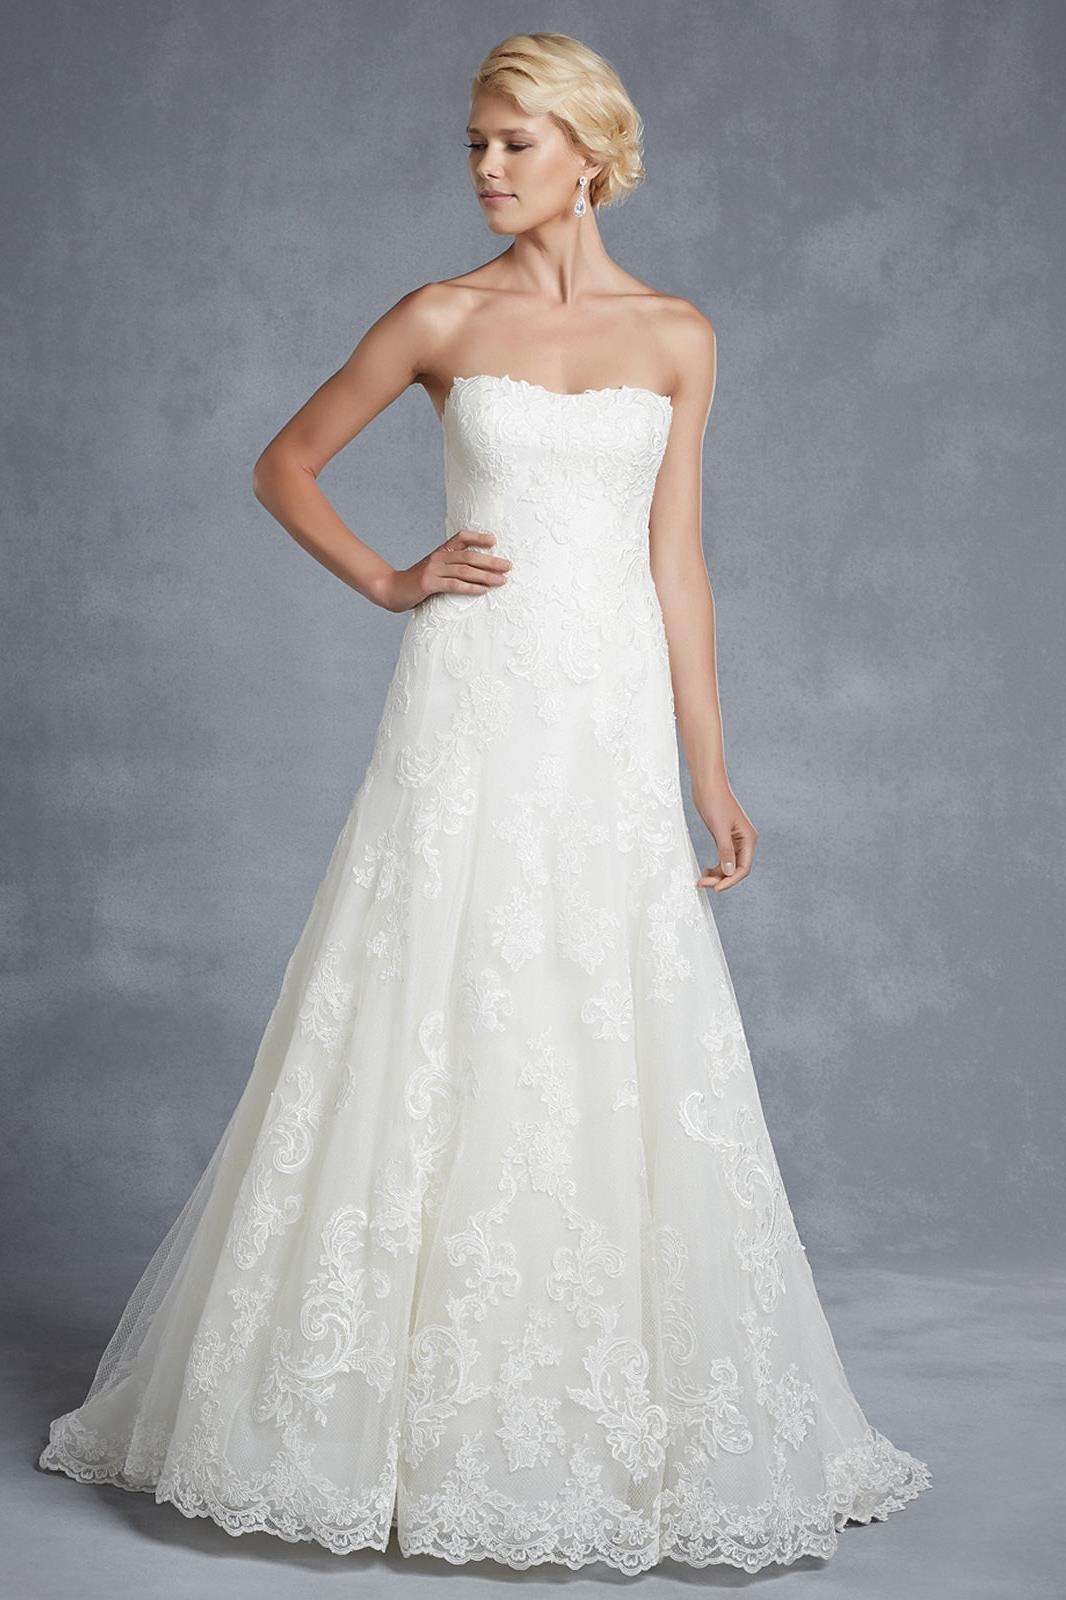 Hamilton Wedding Dress from Blue By Enzoani hitched.co.uk